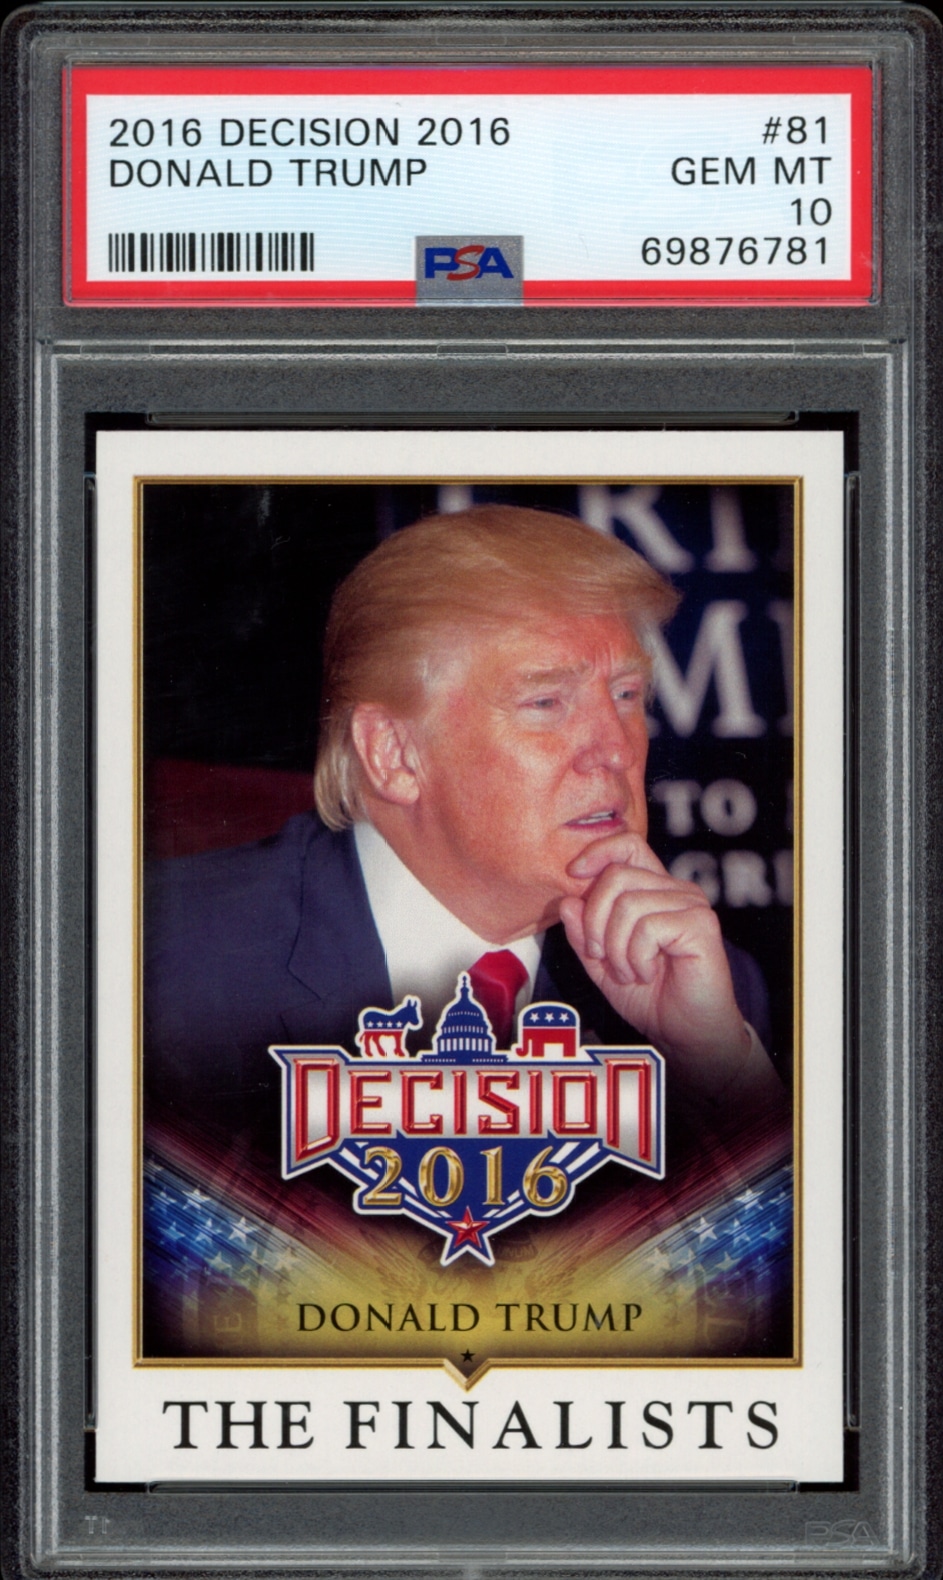 PSA-graded 10 gem mint 2016 Leaf Decision card featuring Donald Trump, #81 in series.